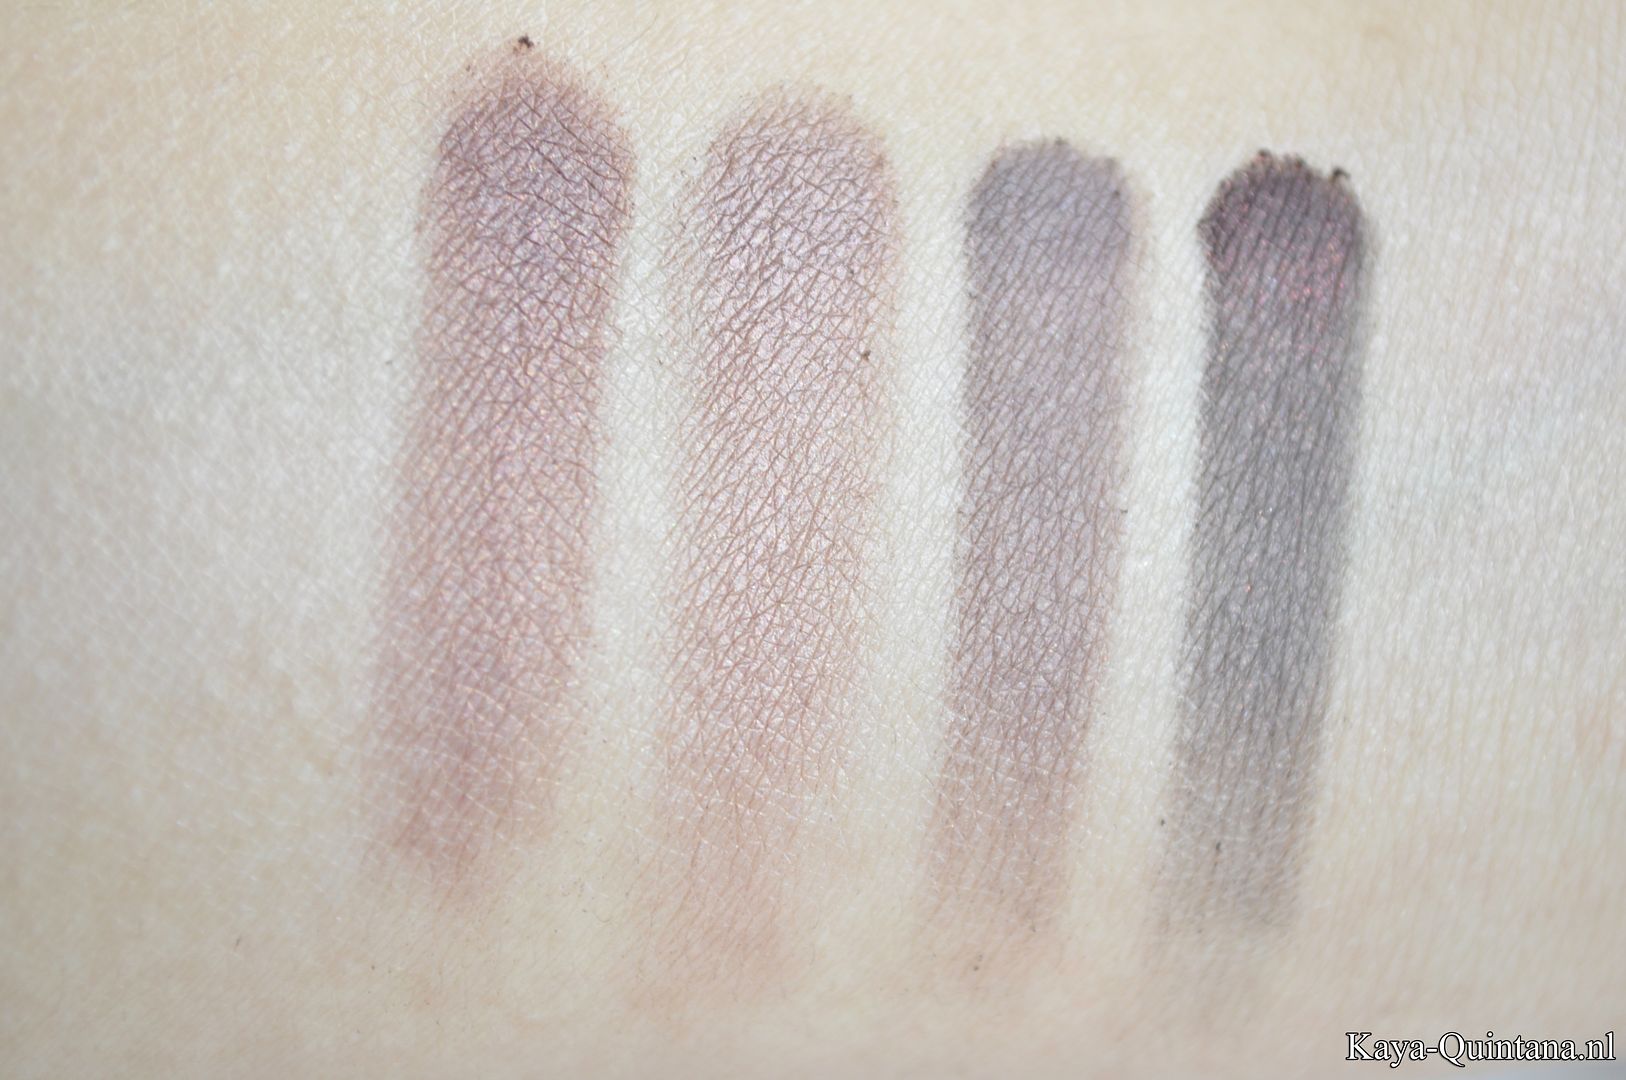 urban decay naked 3 eyeshadow swatches